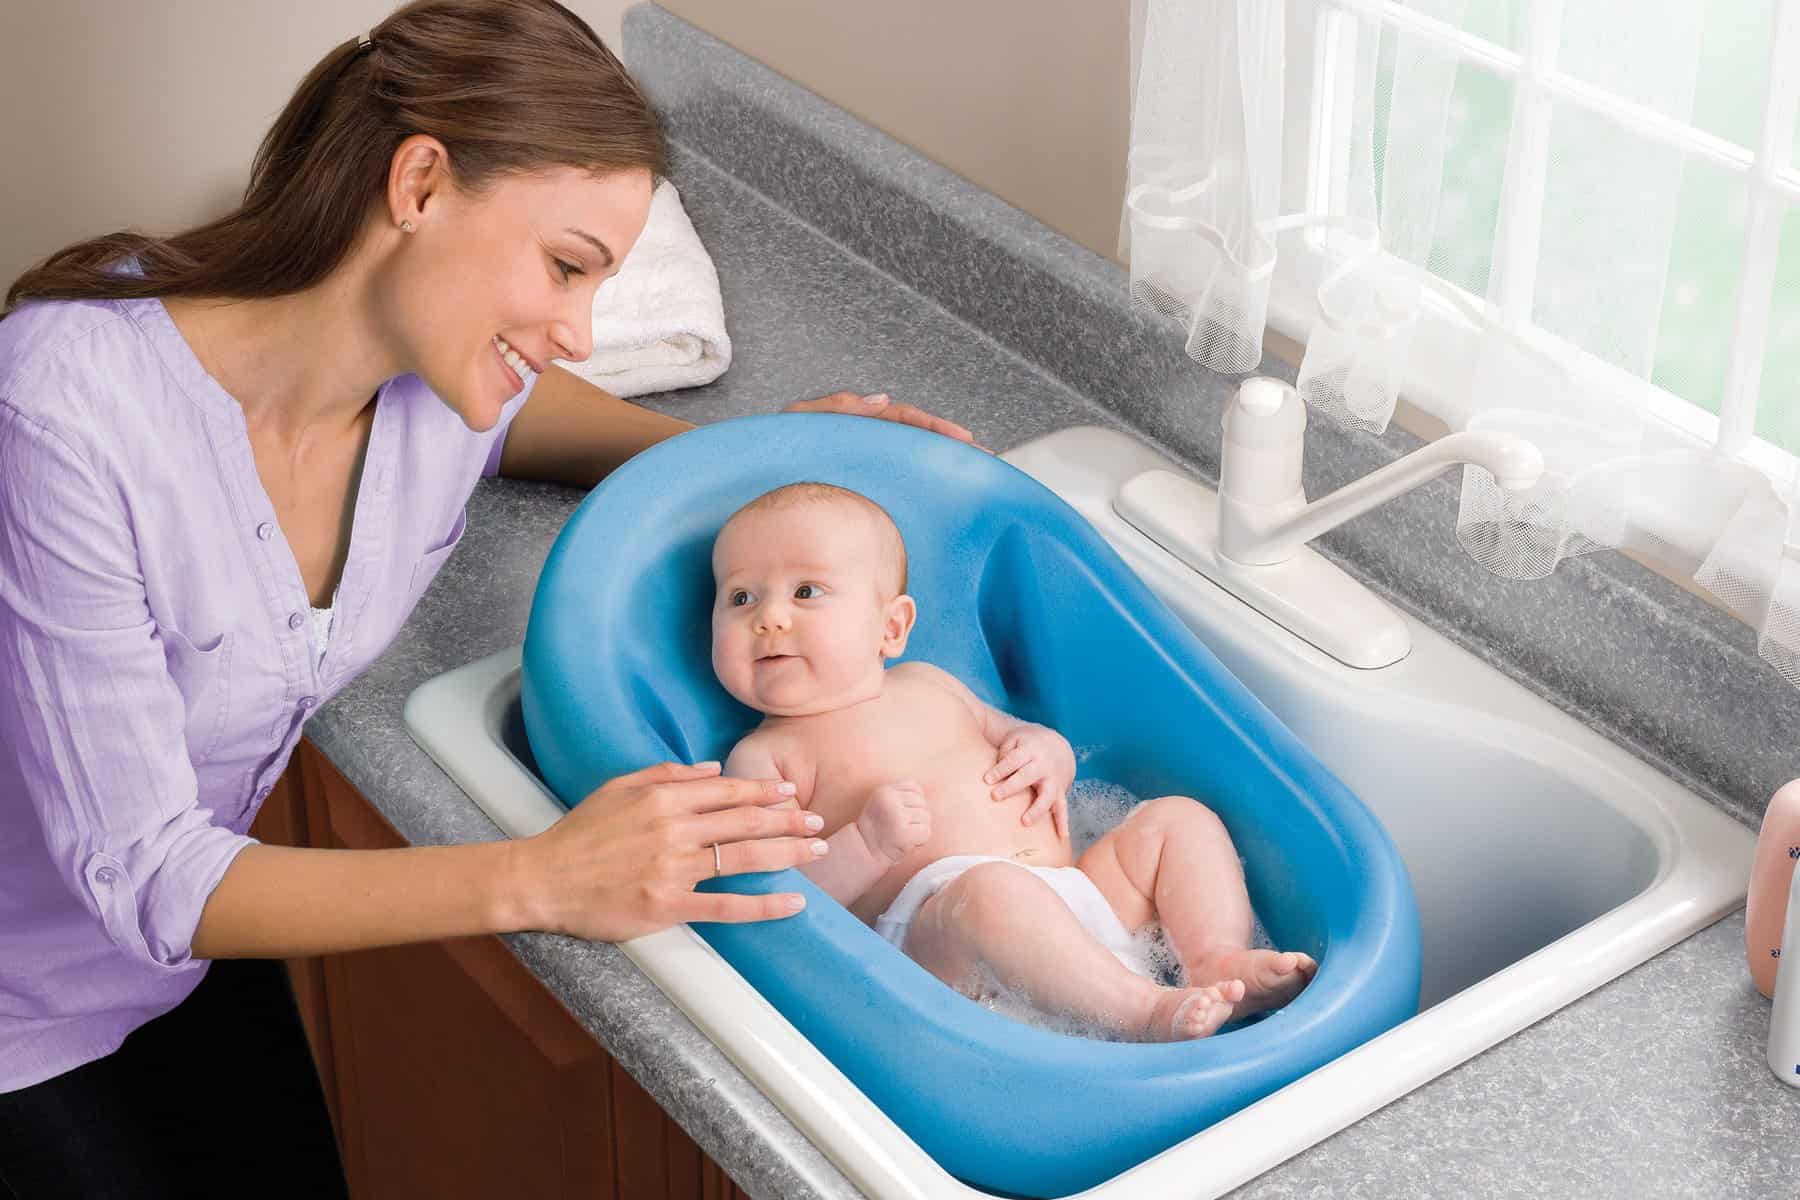 bathing options for babies kitchen countertops